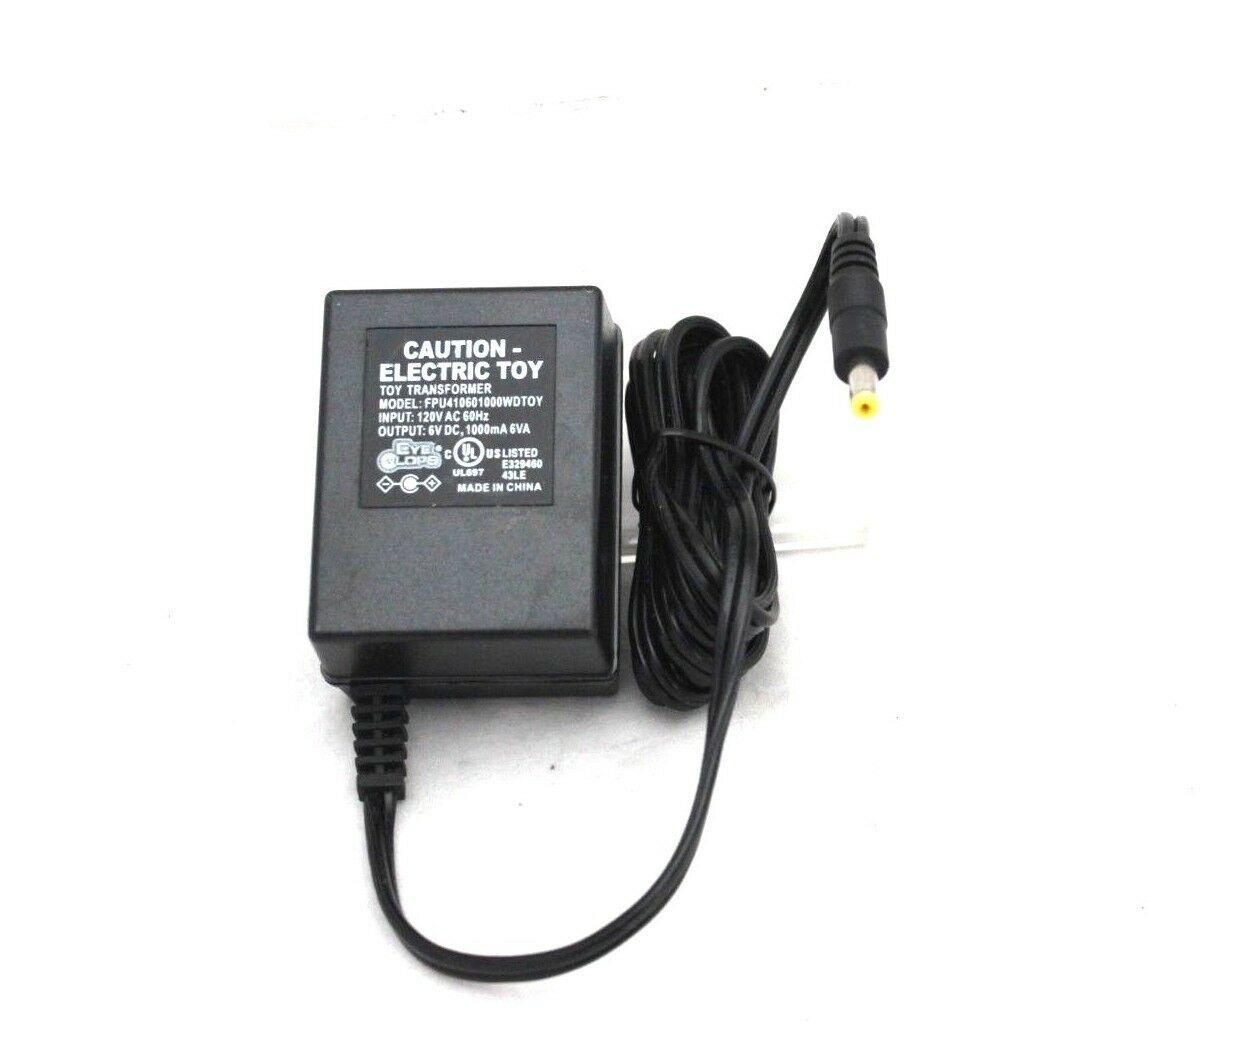 ELECTRIC TOY Transformer Adapter Charger FPU414060100WDTOY 6VDC 100mA 6VA MPN: Does Not Apply Non